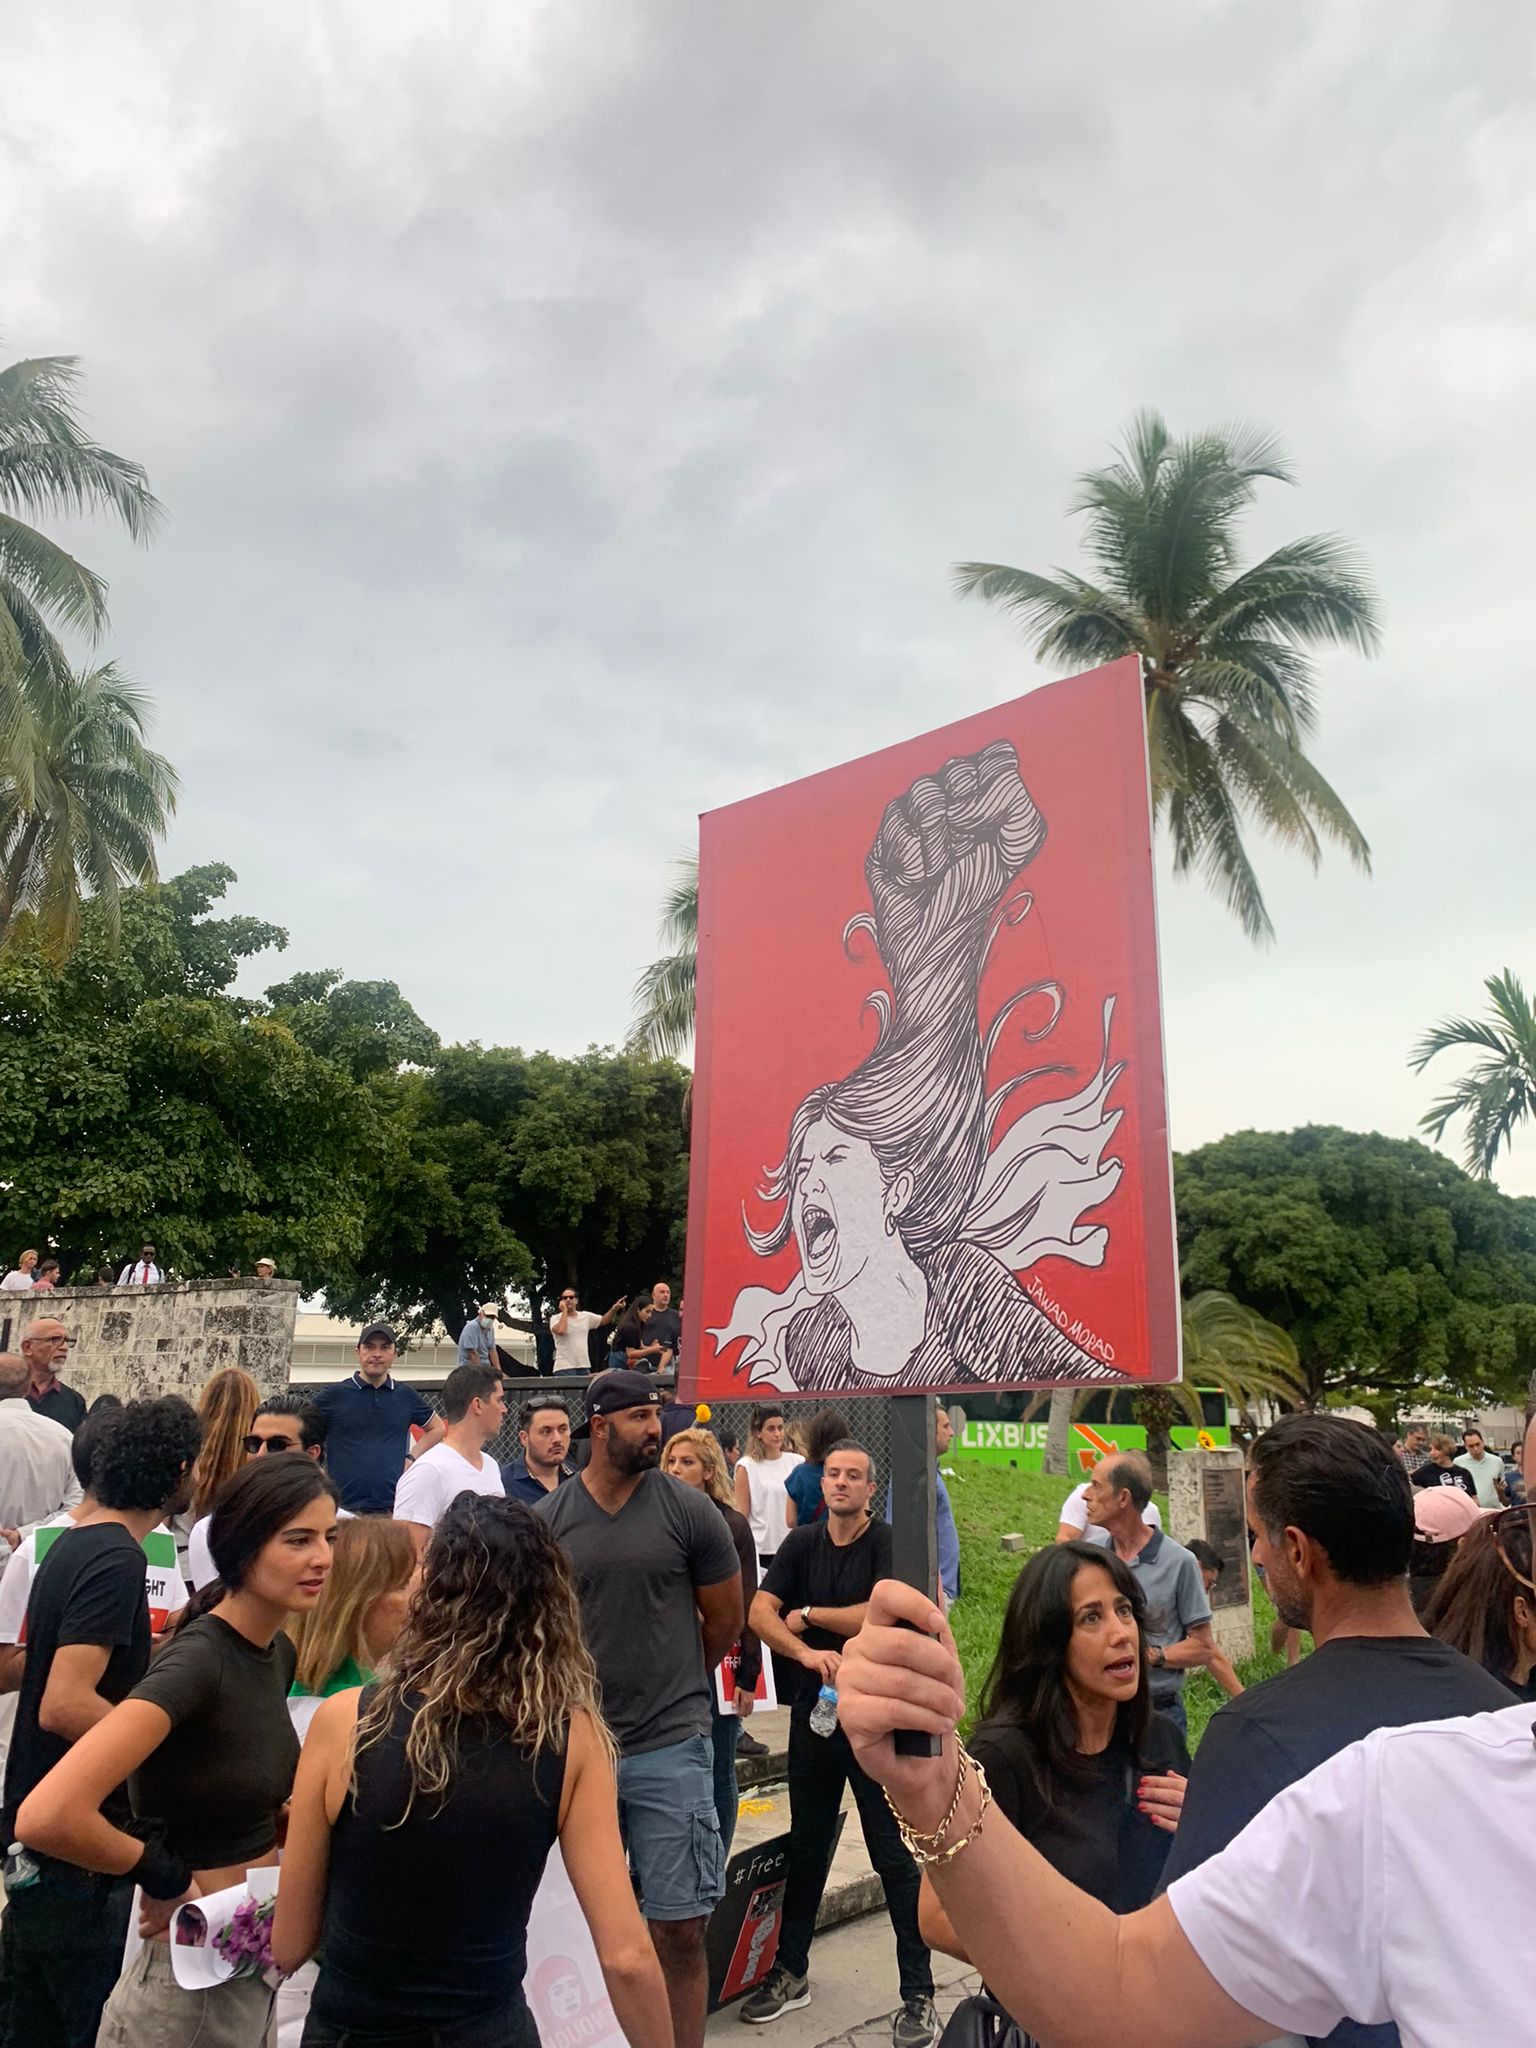 Miami Protest Draws Large Crowd and News Attention